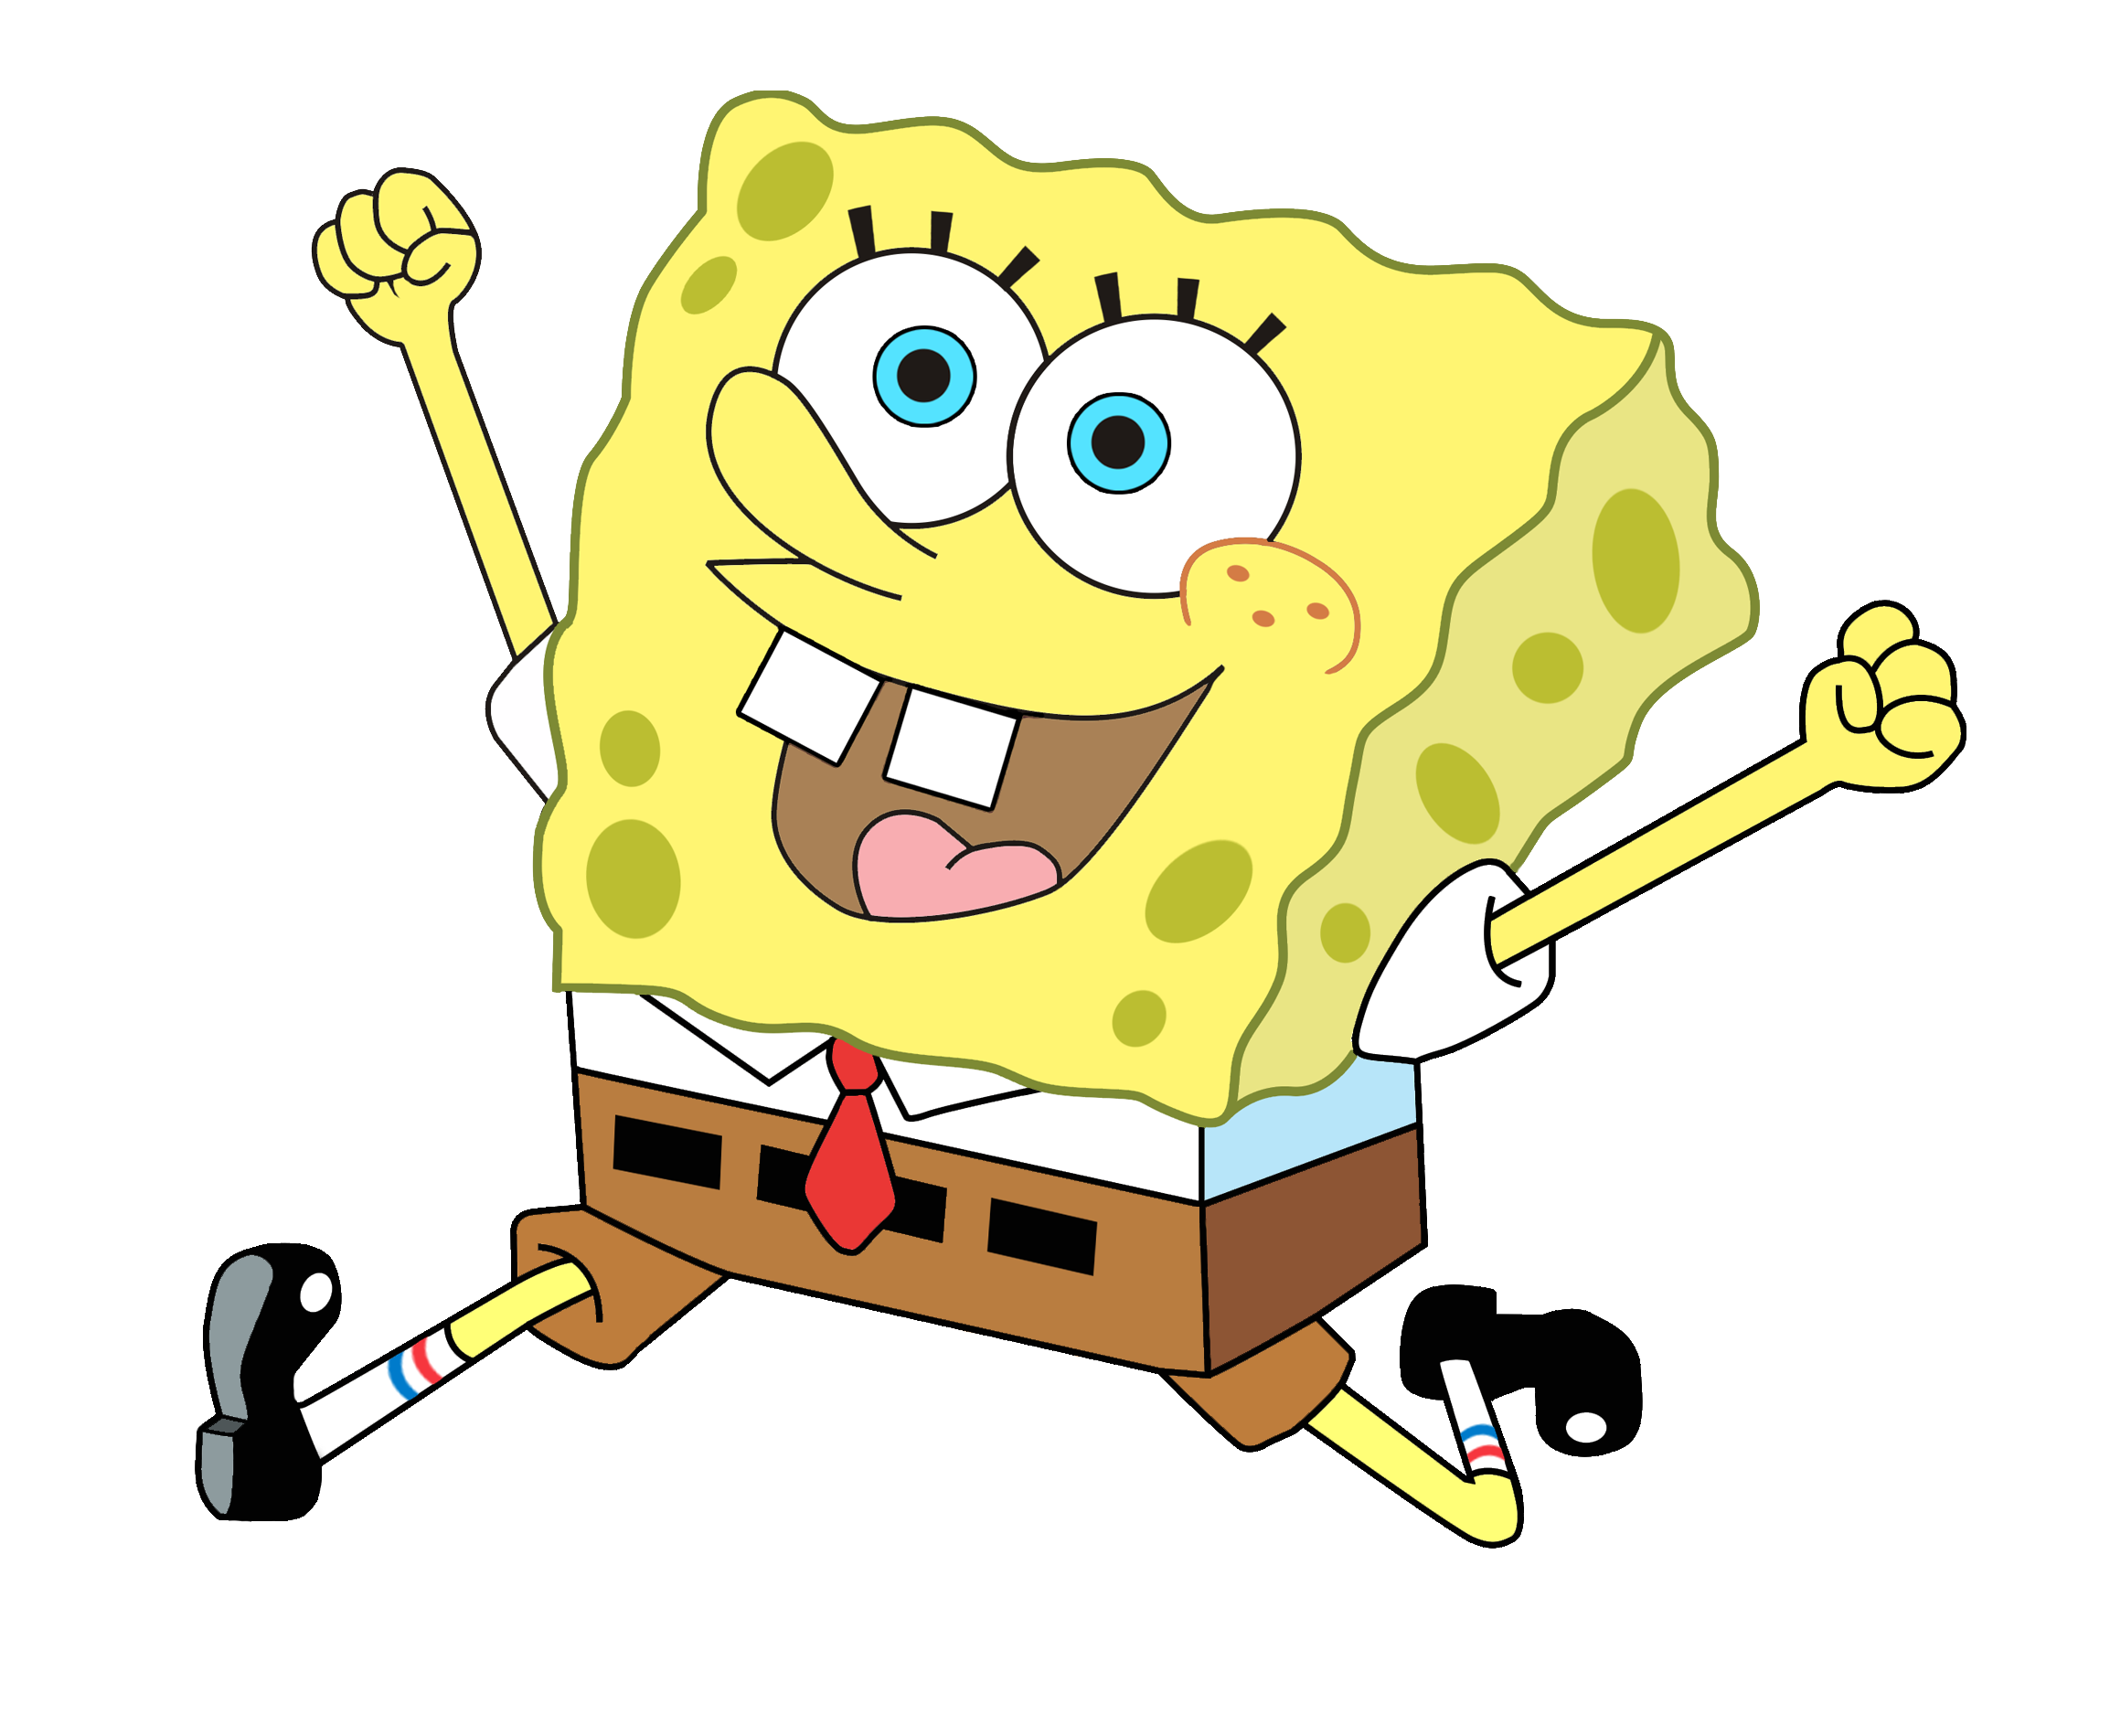 Spongebob And Patrick Png #44222 - Free Icons and PNG Backgrounds